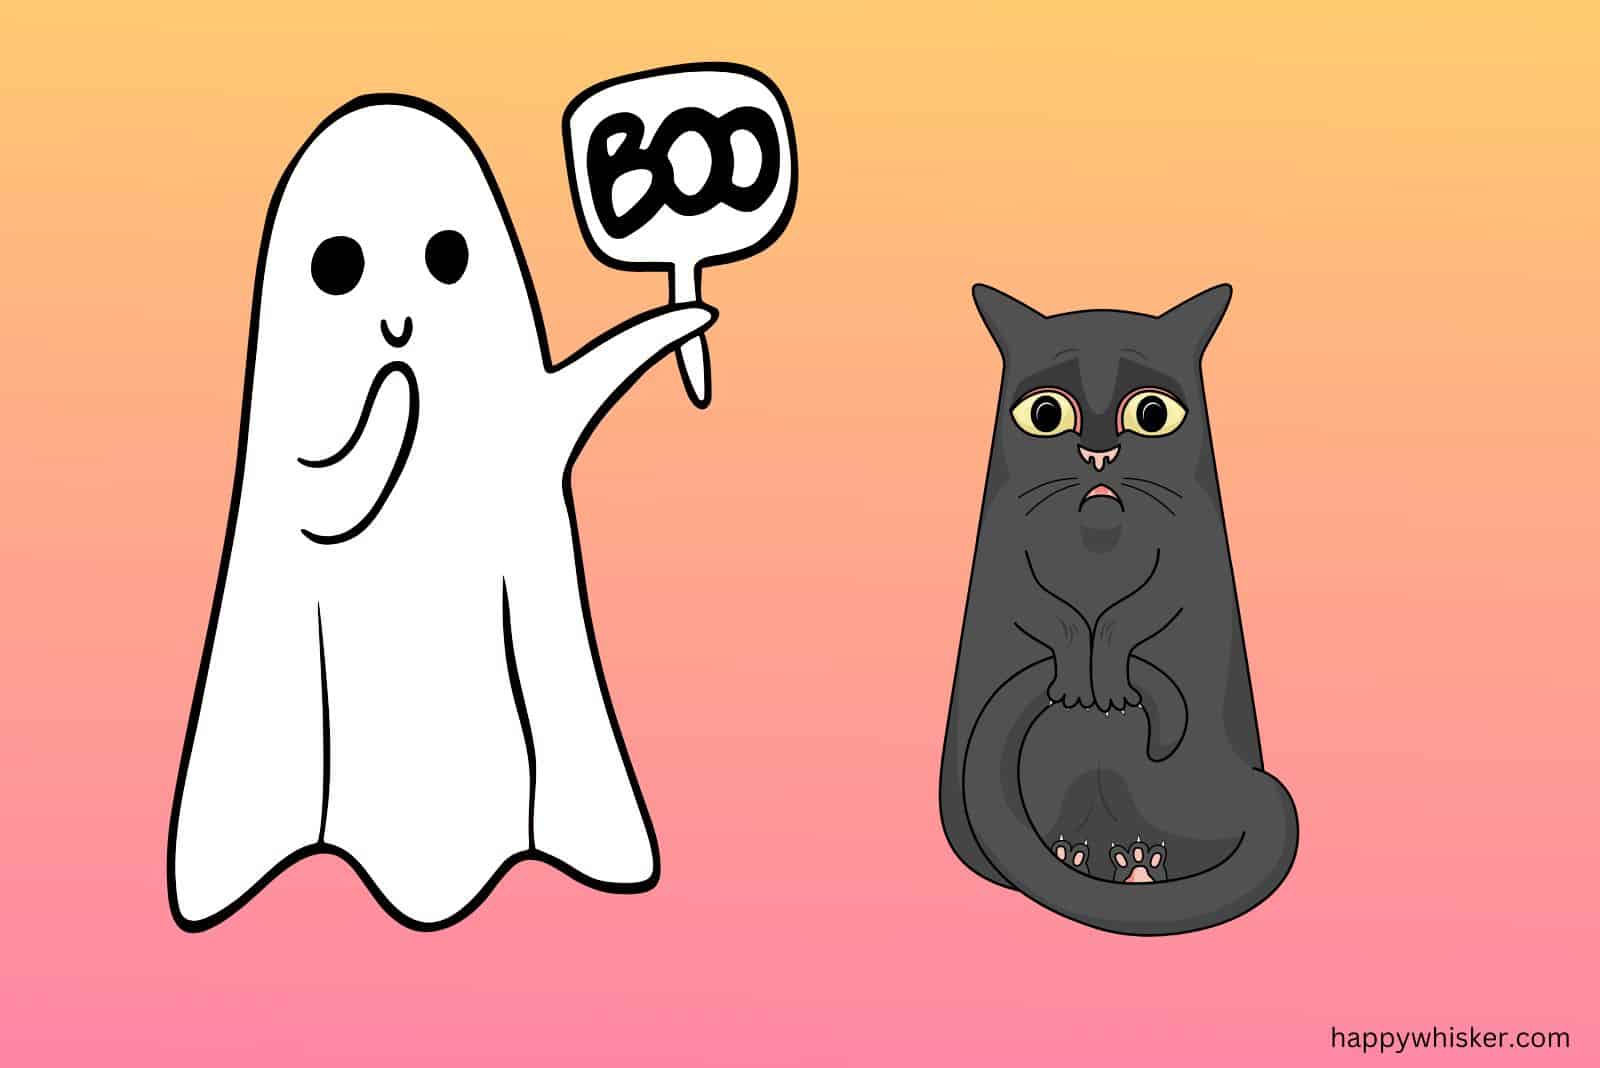 ghost and cat illustration